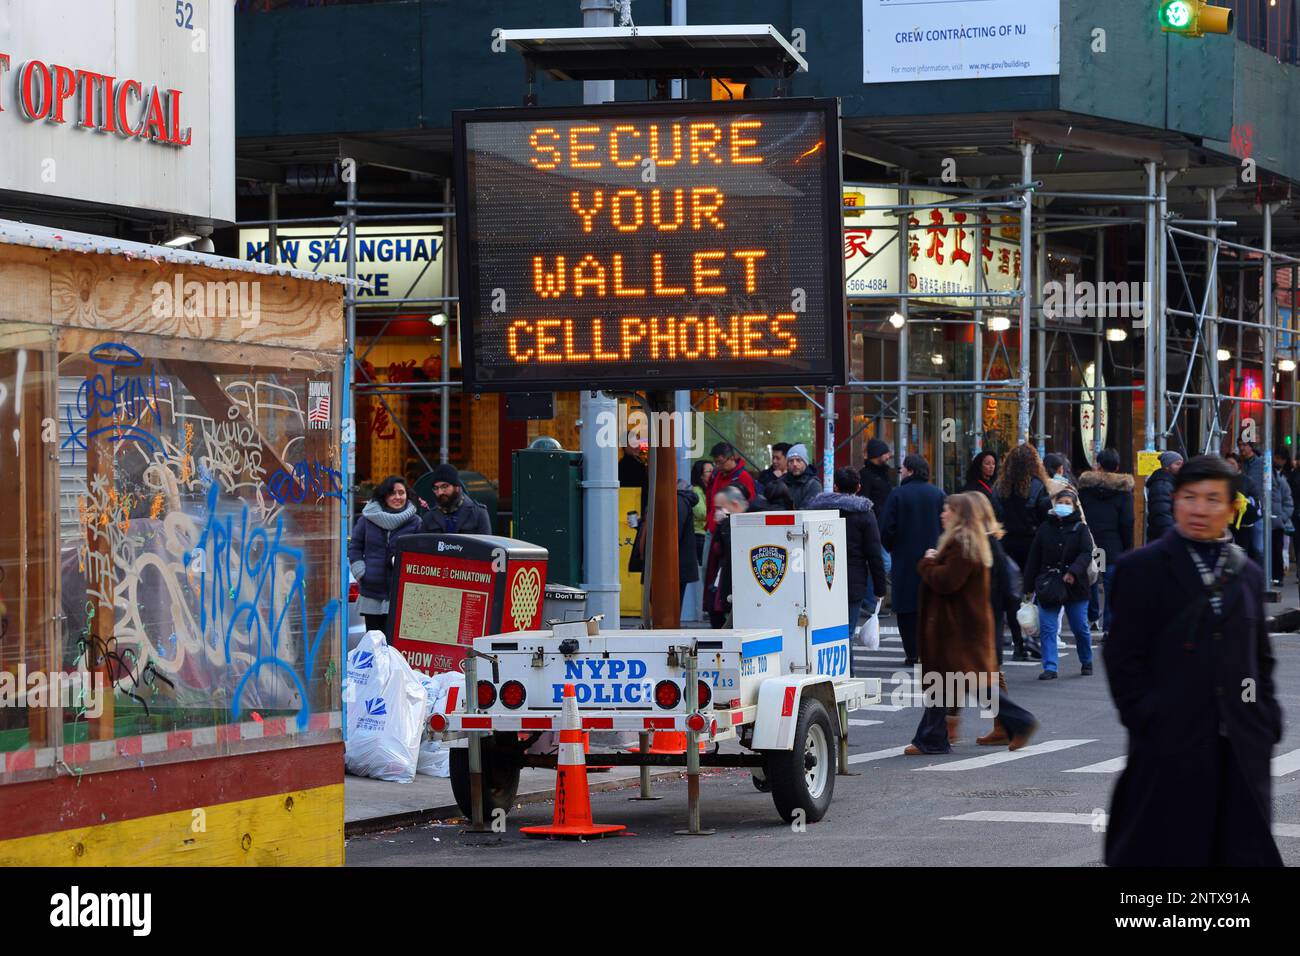 'Secure Your Wallet Cellphones' message on a NYPD traffic sign trailer during the Chinese New Year celebrations in Manhattan Chinatown, New York. Stock Photo